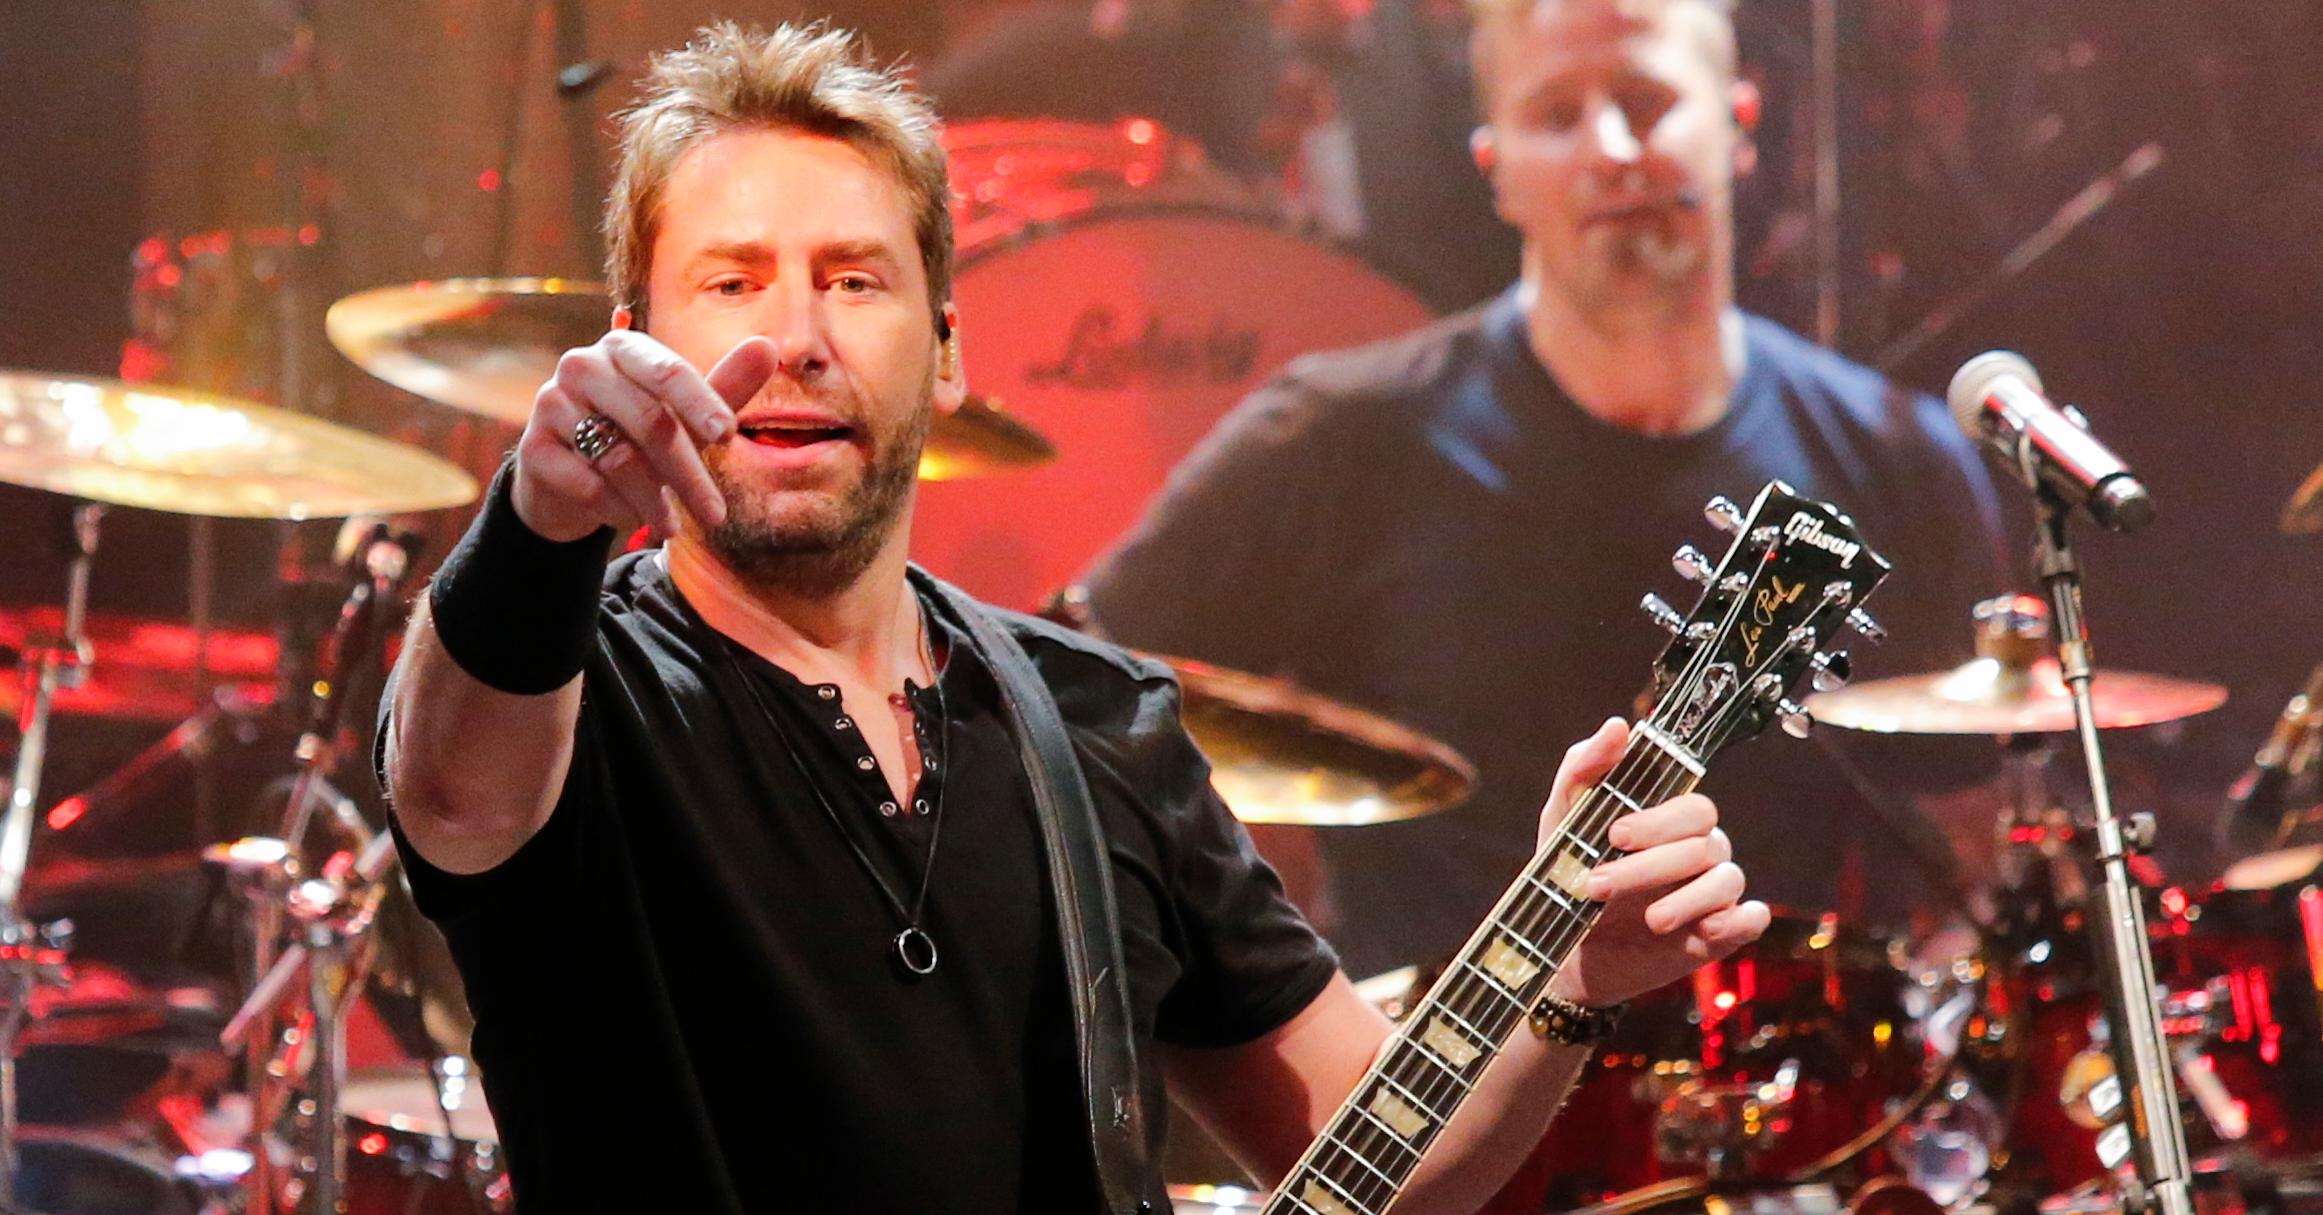 What Happened to Nickelback? Why They're the Most Hated Band Ever